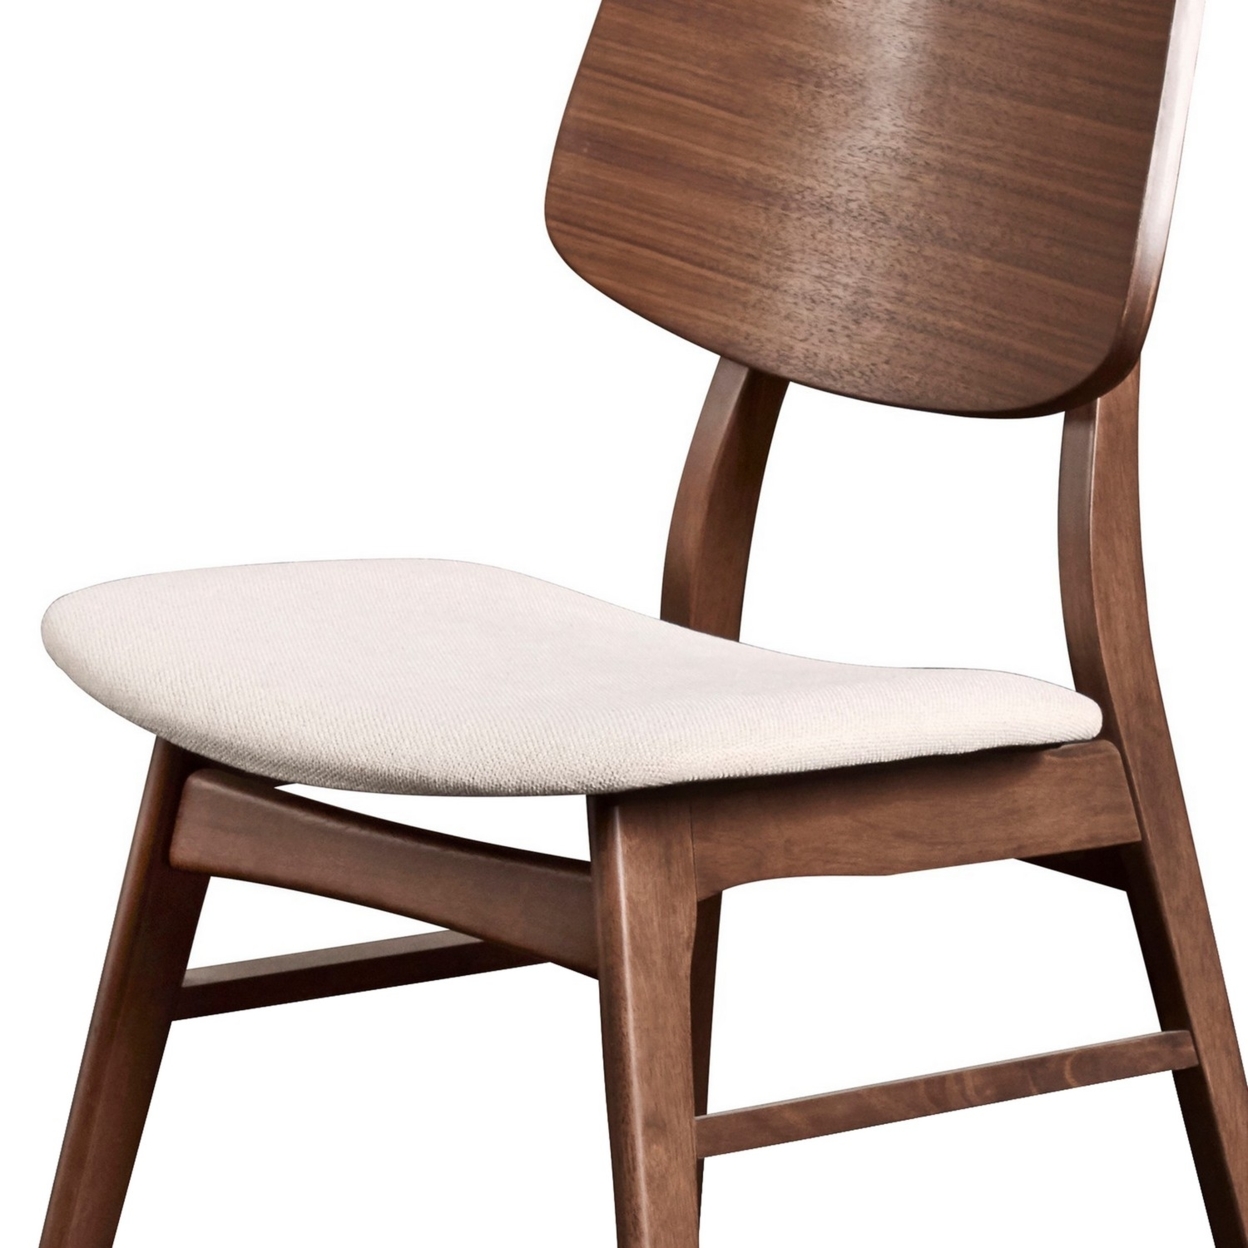 Curved Wooden Back Chair With Fabric Padded Seat, Set Of 2,Brown And White- Saltoro Sherpi